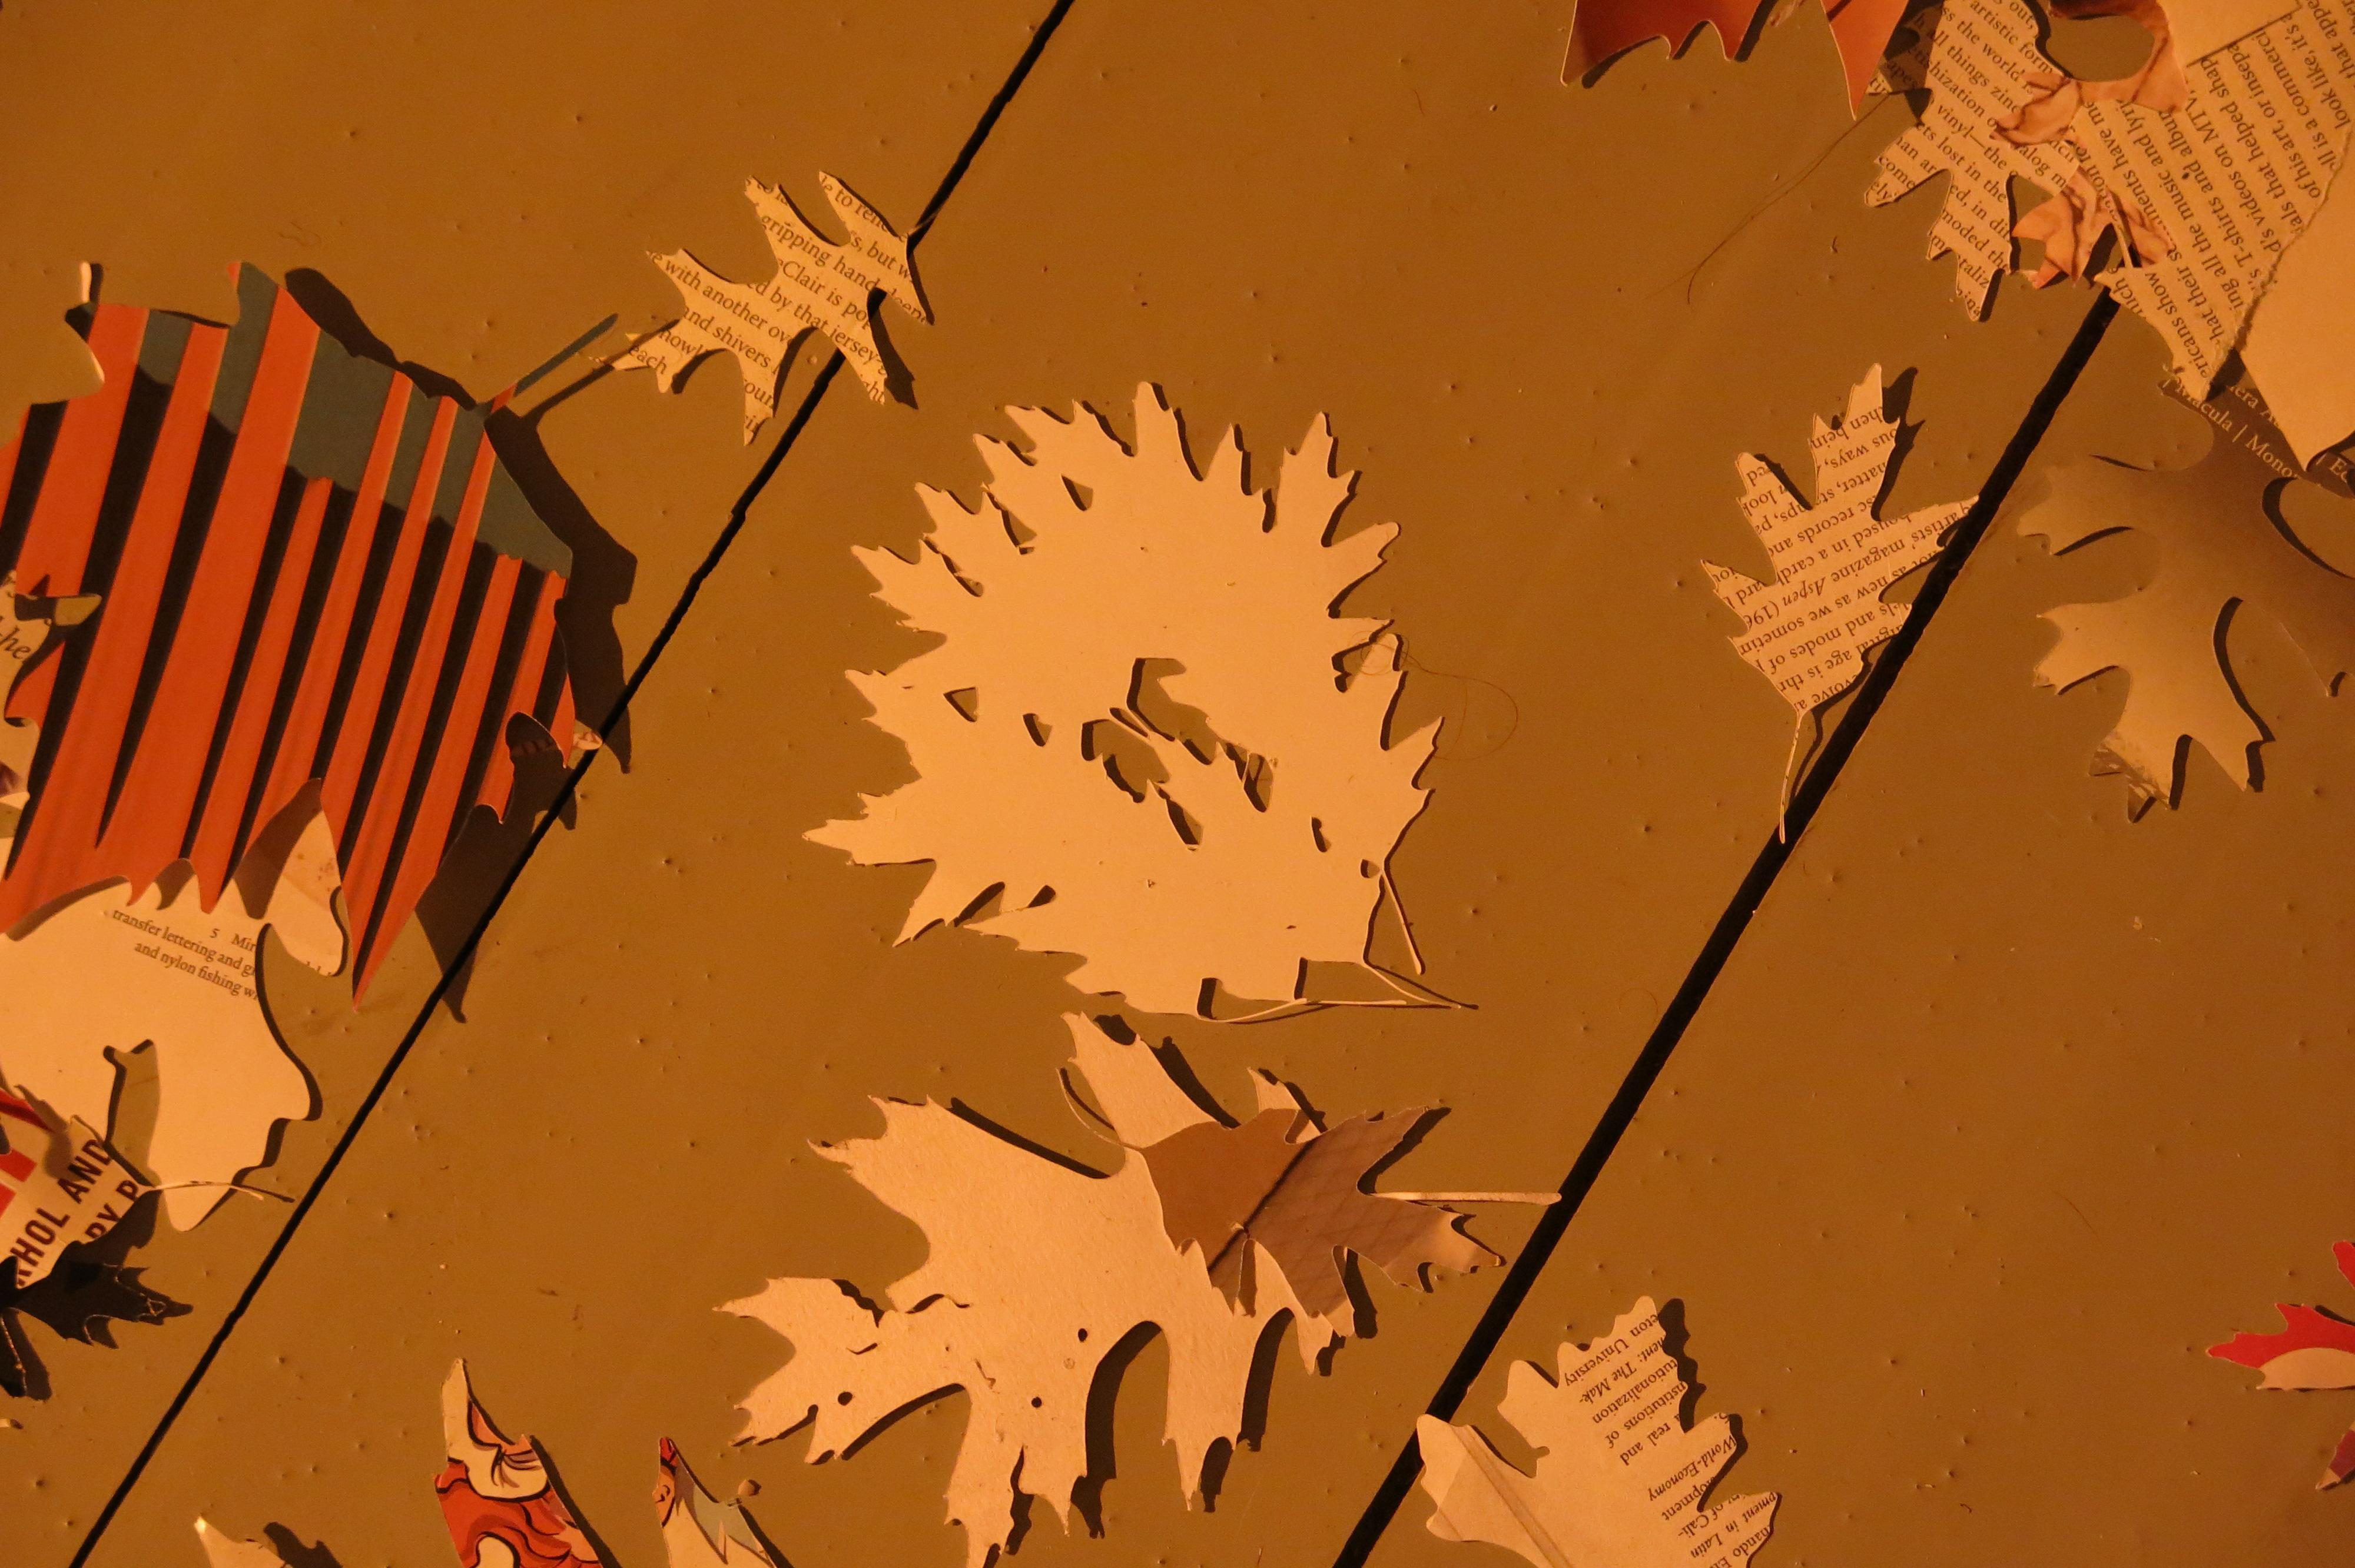 A dozen leaf shapes cut out from newspaper have been scattered on a brown background.